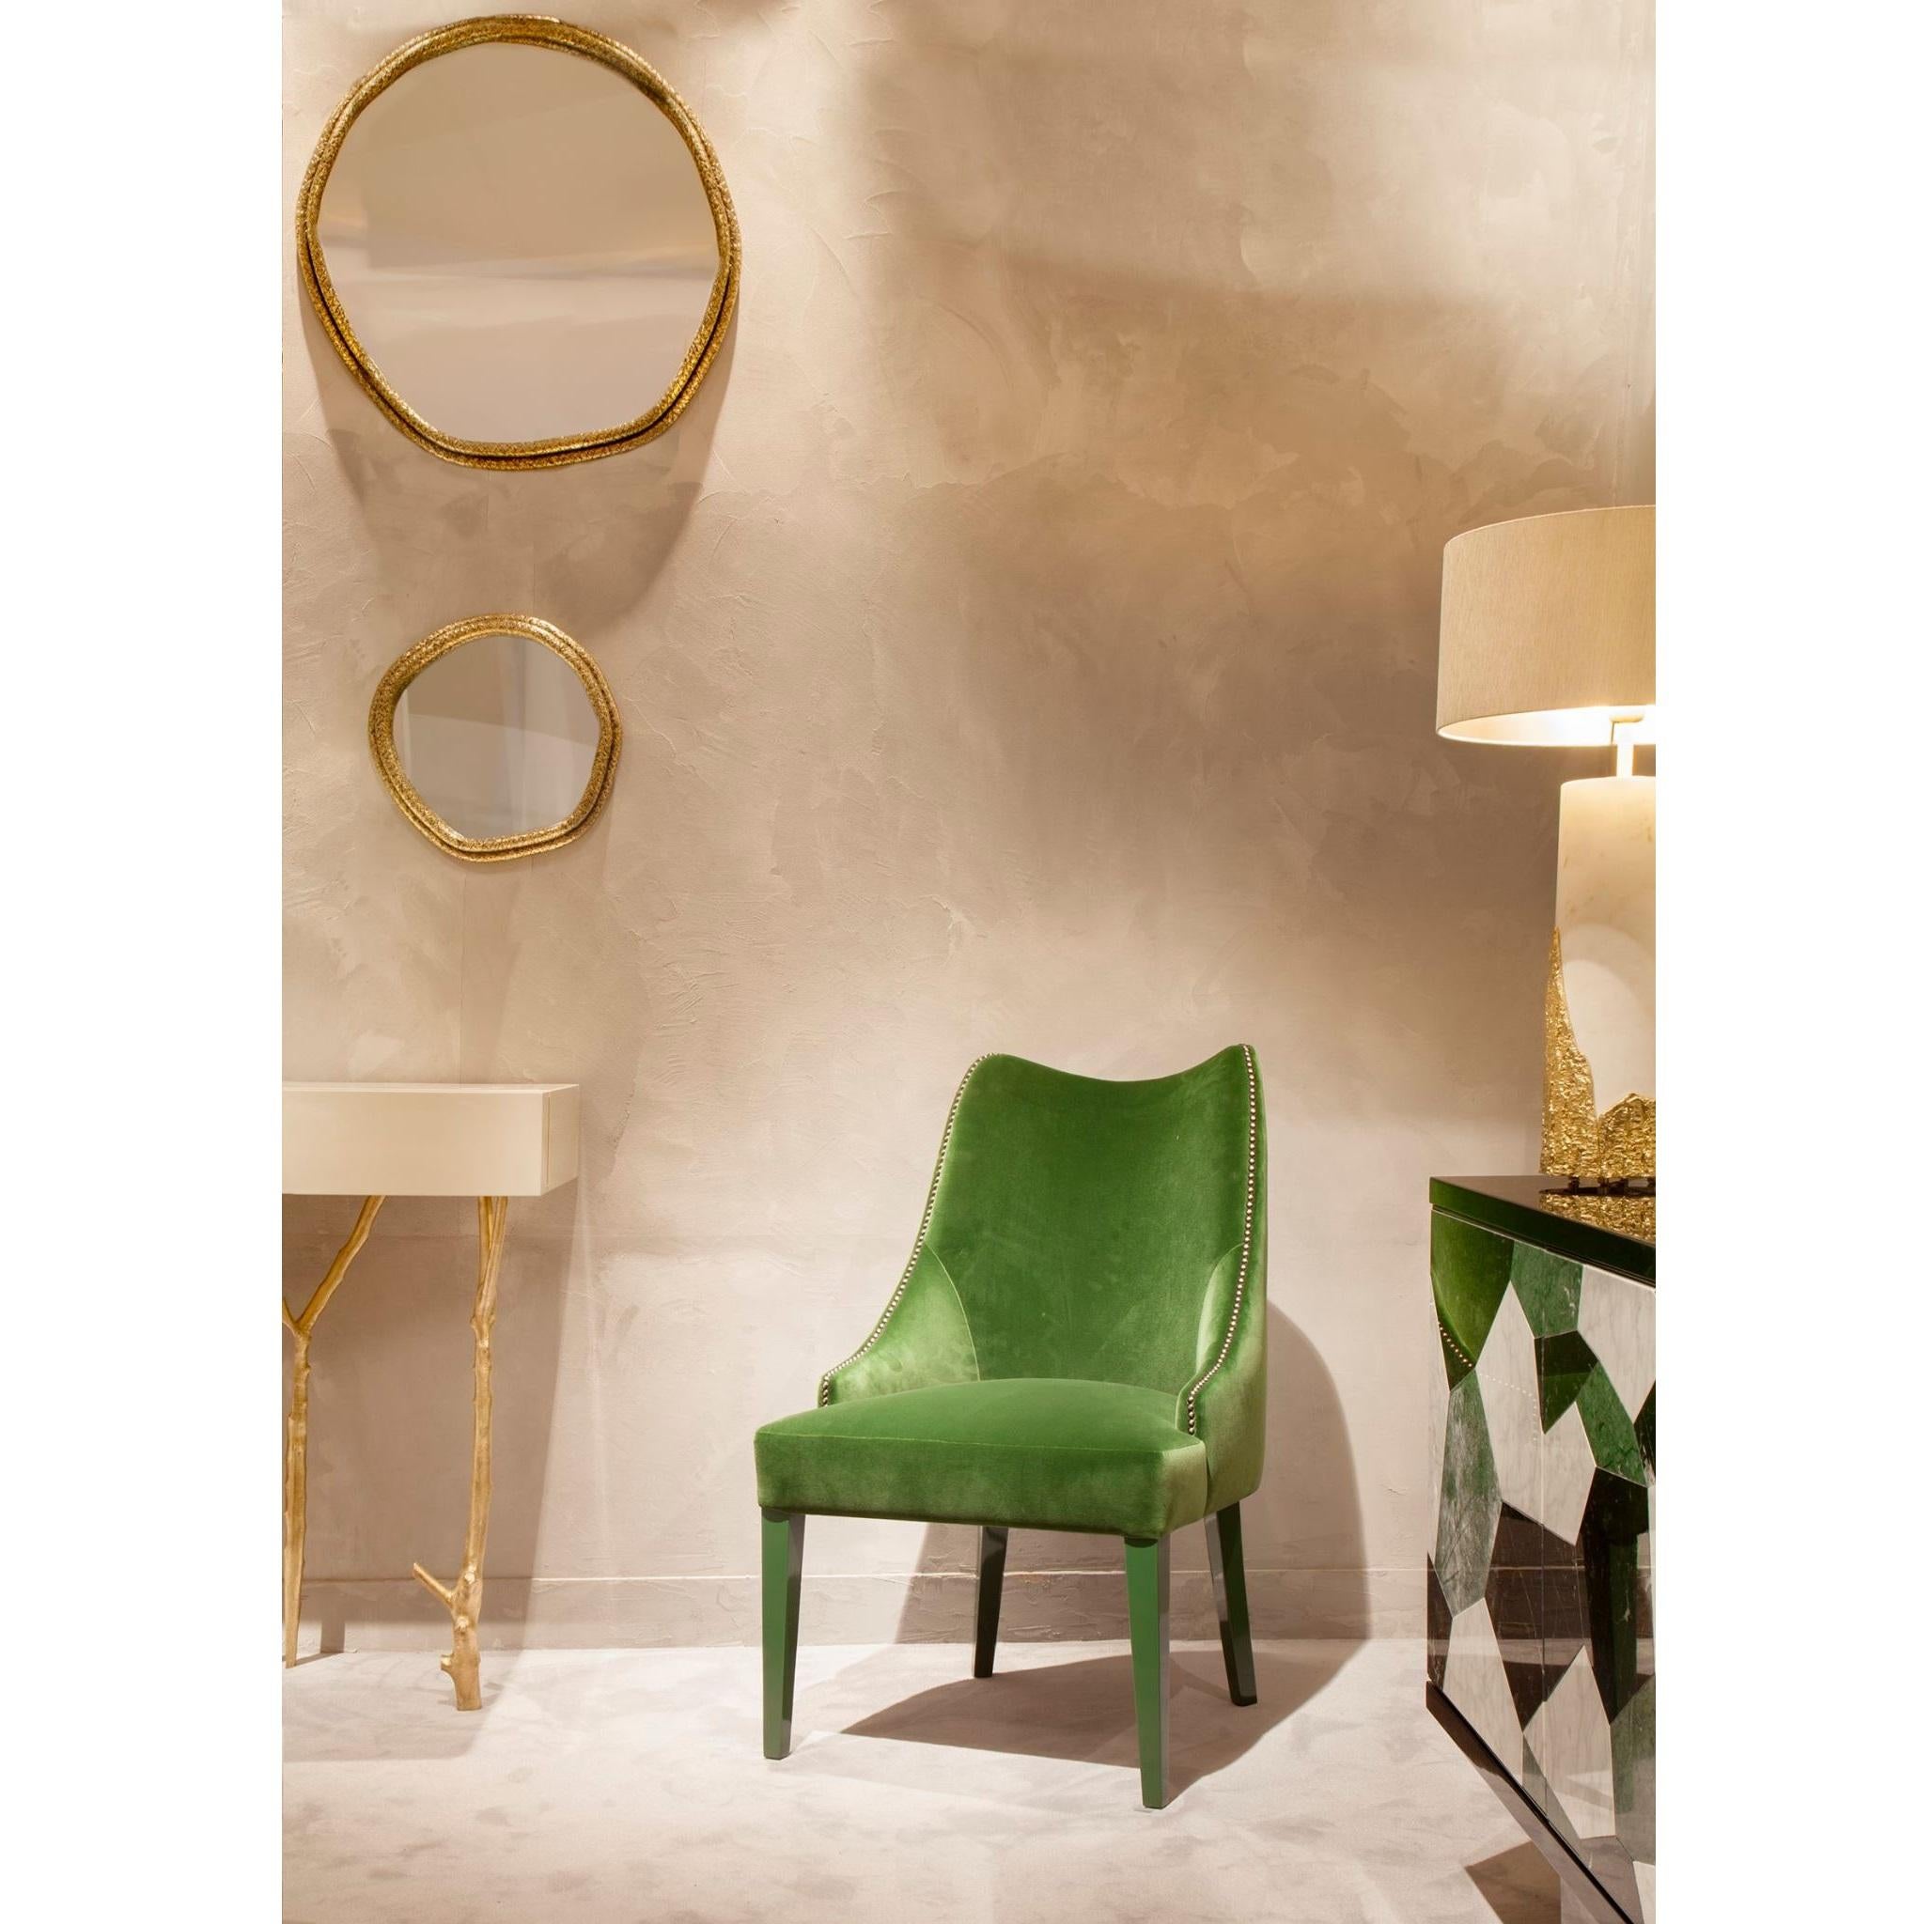 Contemporary Velvet Dining Chair Offered With Nails On The Curve & Back im Angebot 1